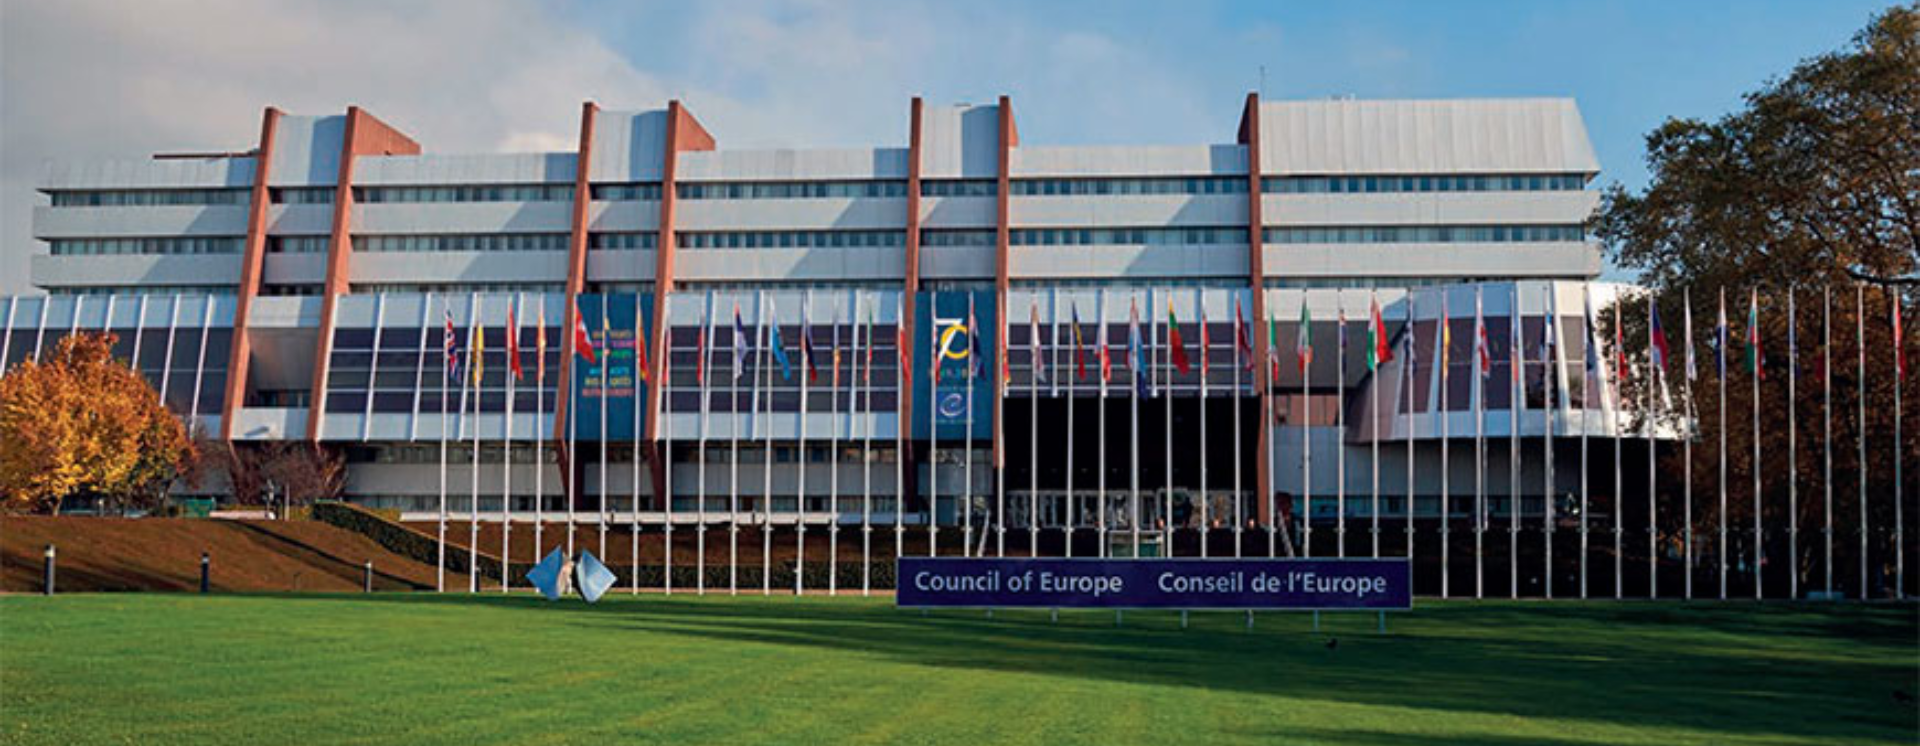 The Council of Europe Building